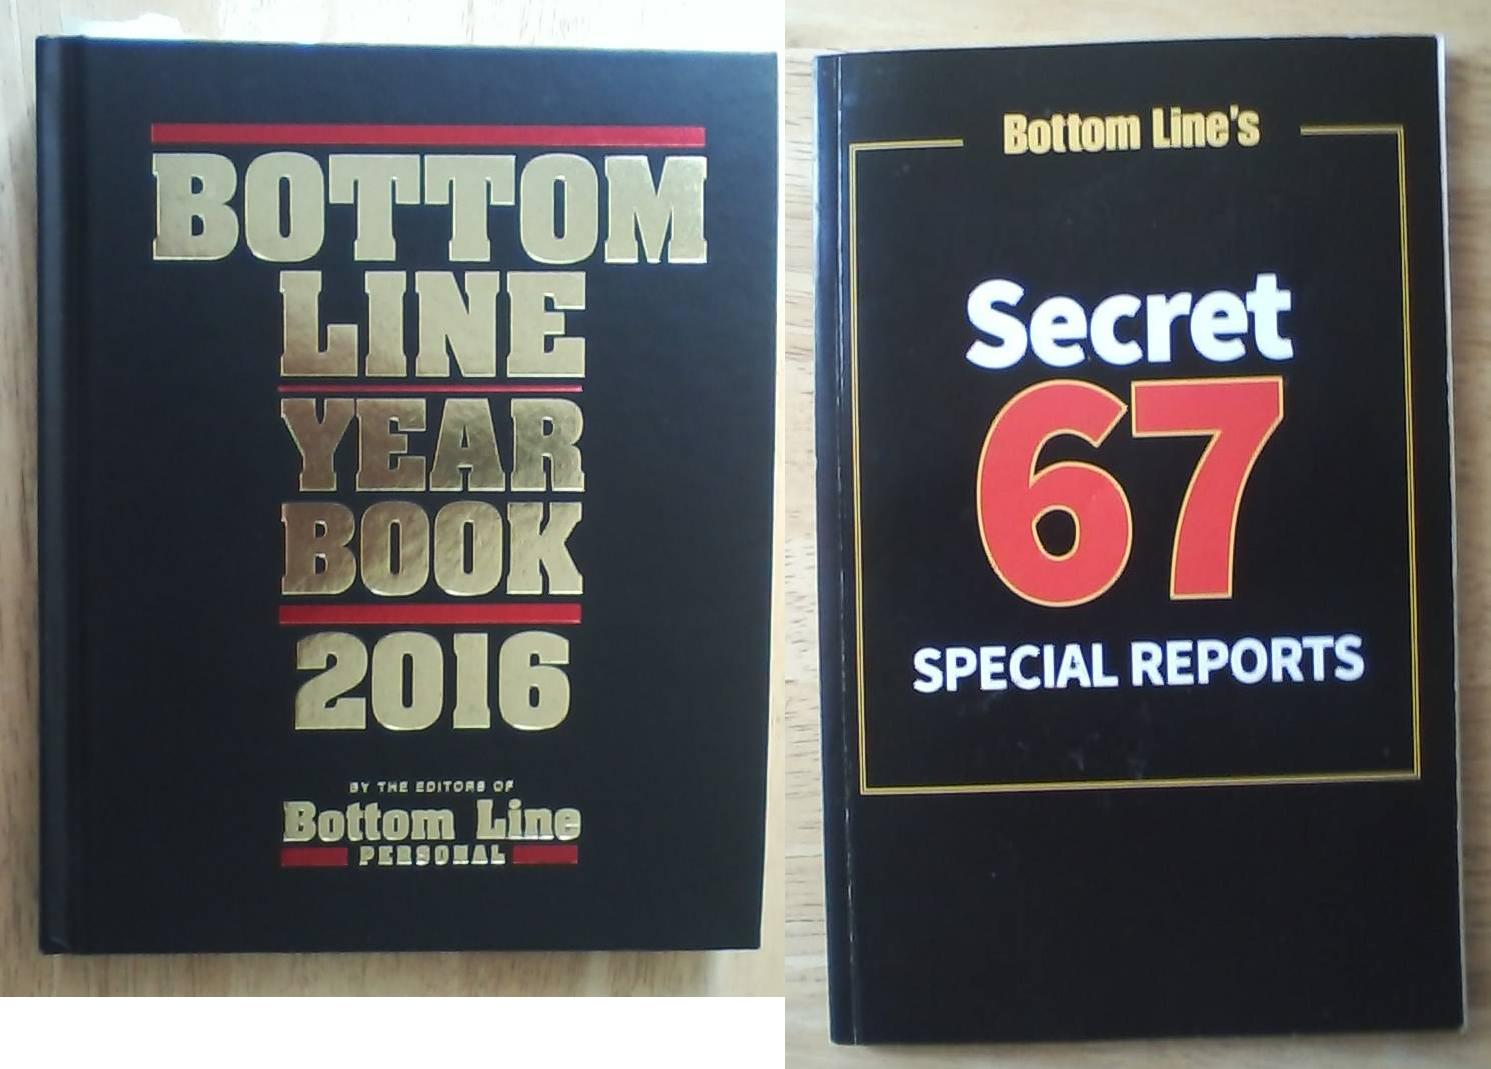 Bottom Line Year Book 2016 and 67 Secret Special Reports